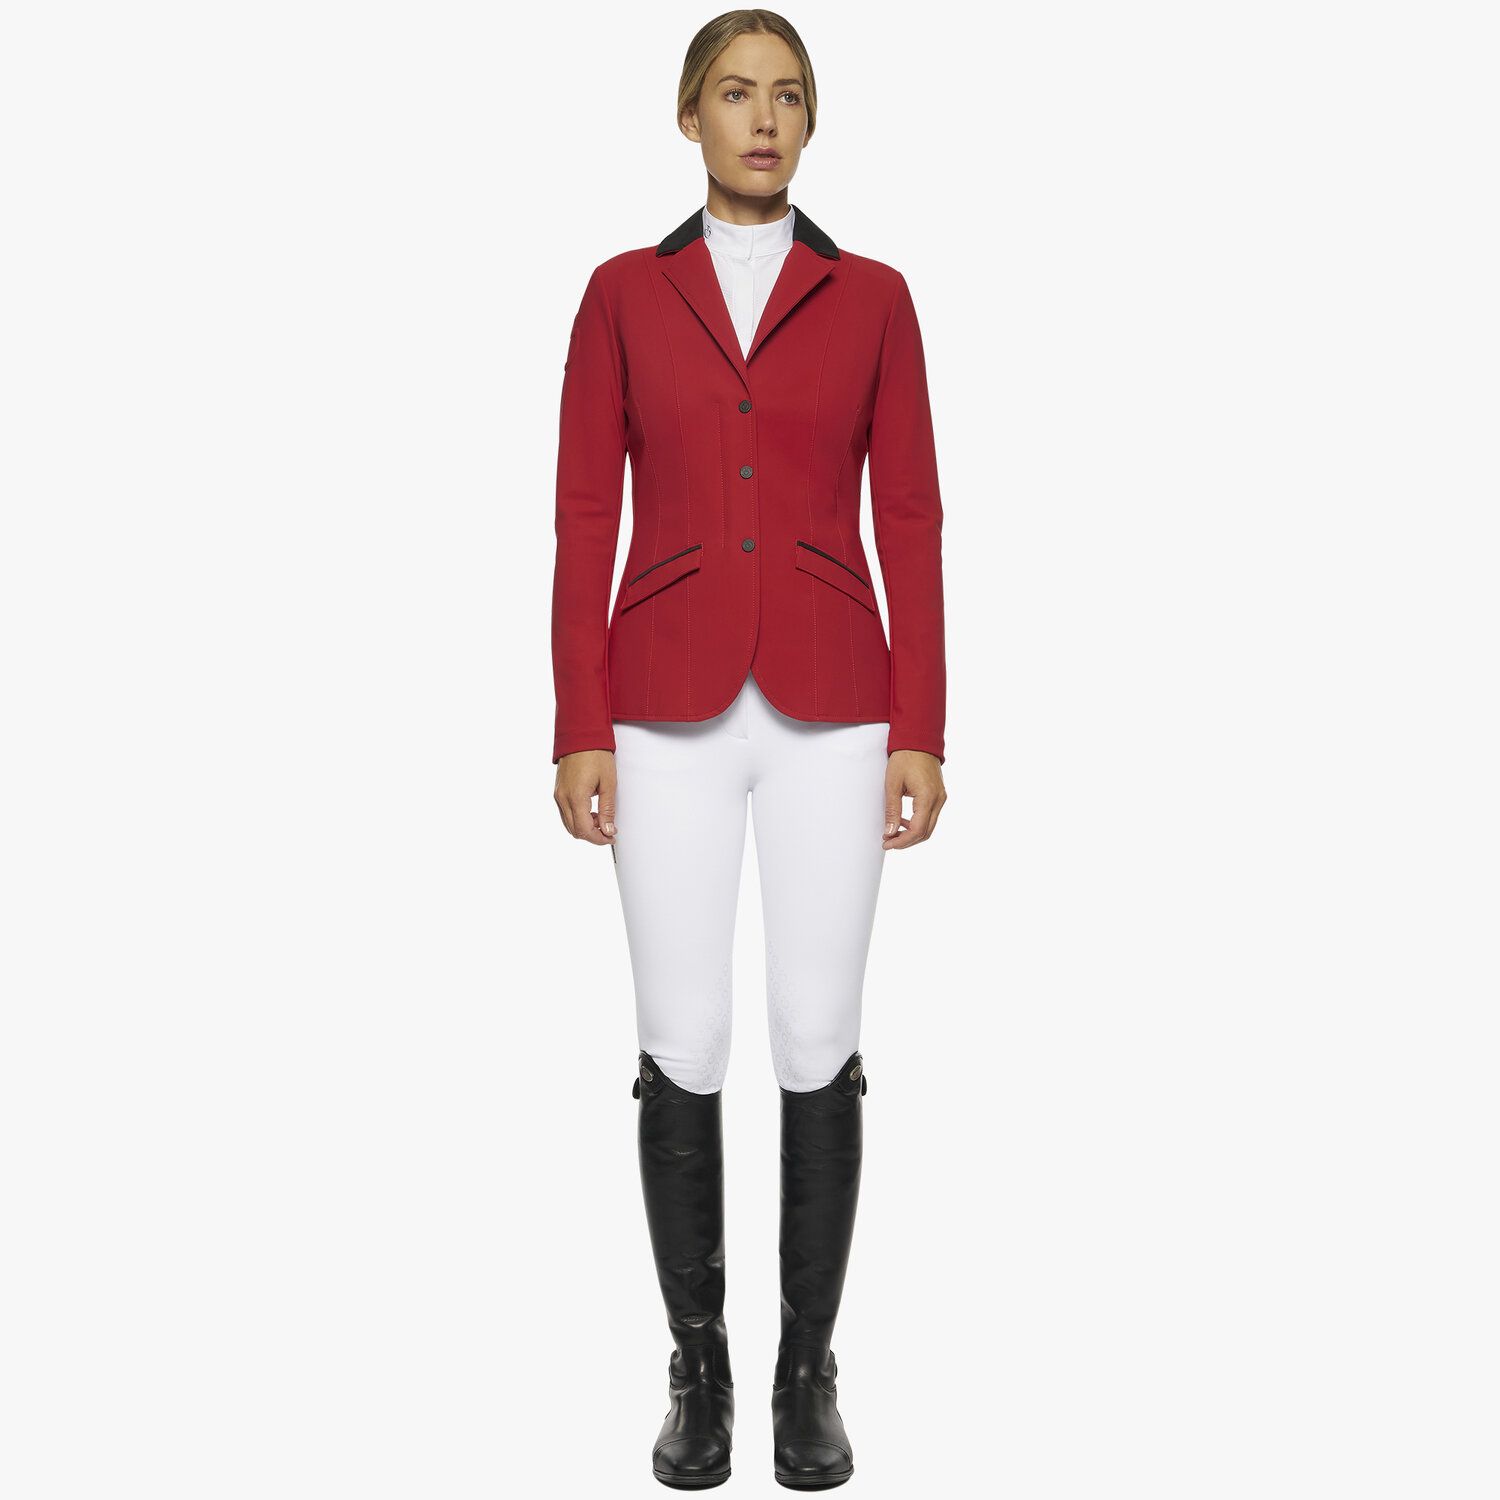 Cavalleria Toscana Women's zip and buttons riding jacket RED-3